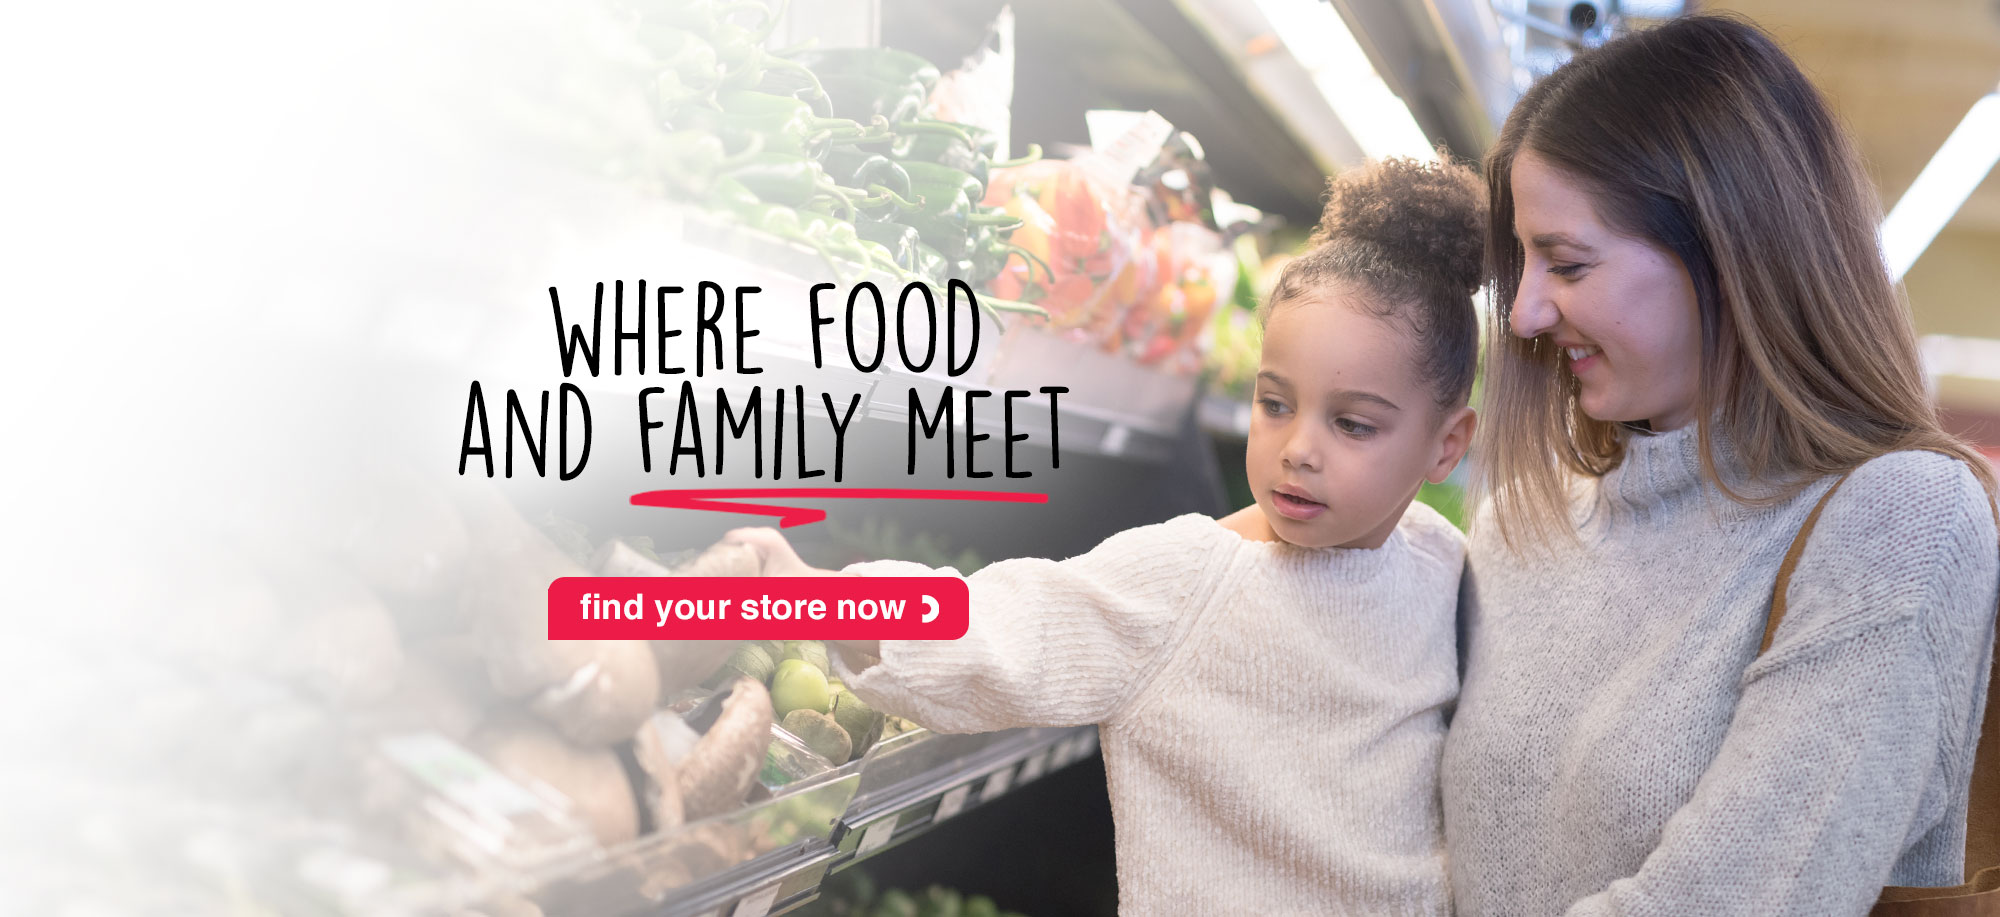 Where Food and Family Meet - Find Your Store Now